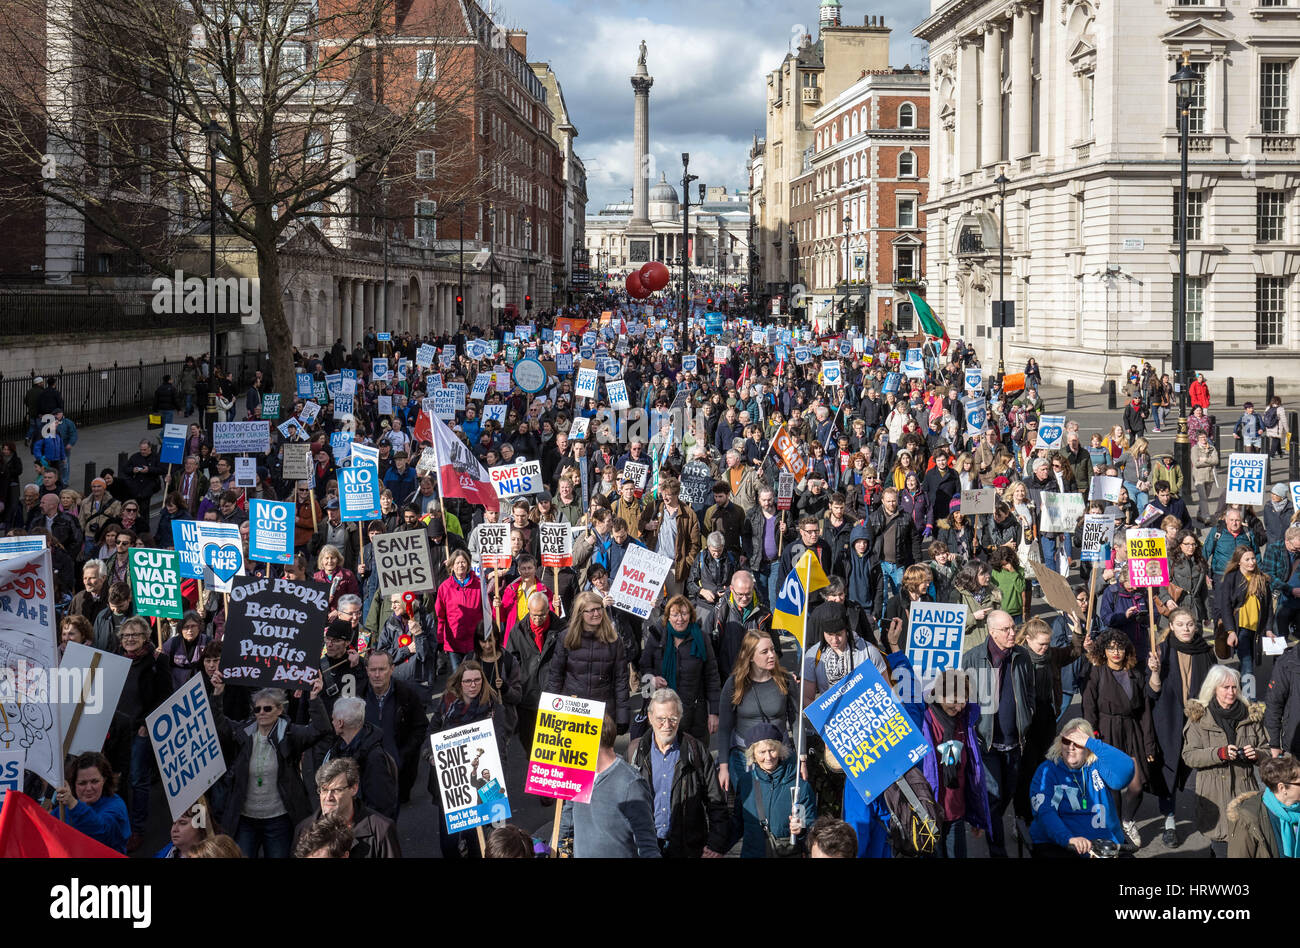 London, UK. 4th March, 2017. Thousands march through central London for the National Demonstration to Defend the NHS © Guy Corbishley/Alamy Live News Stock Photo